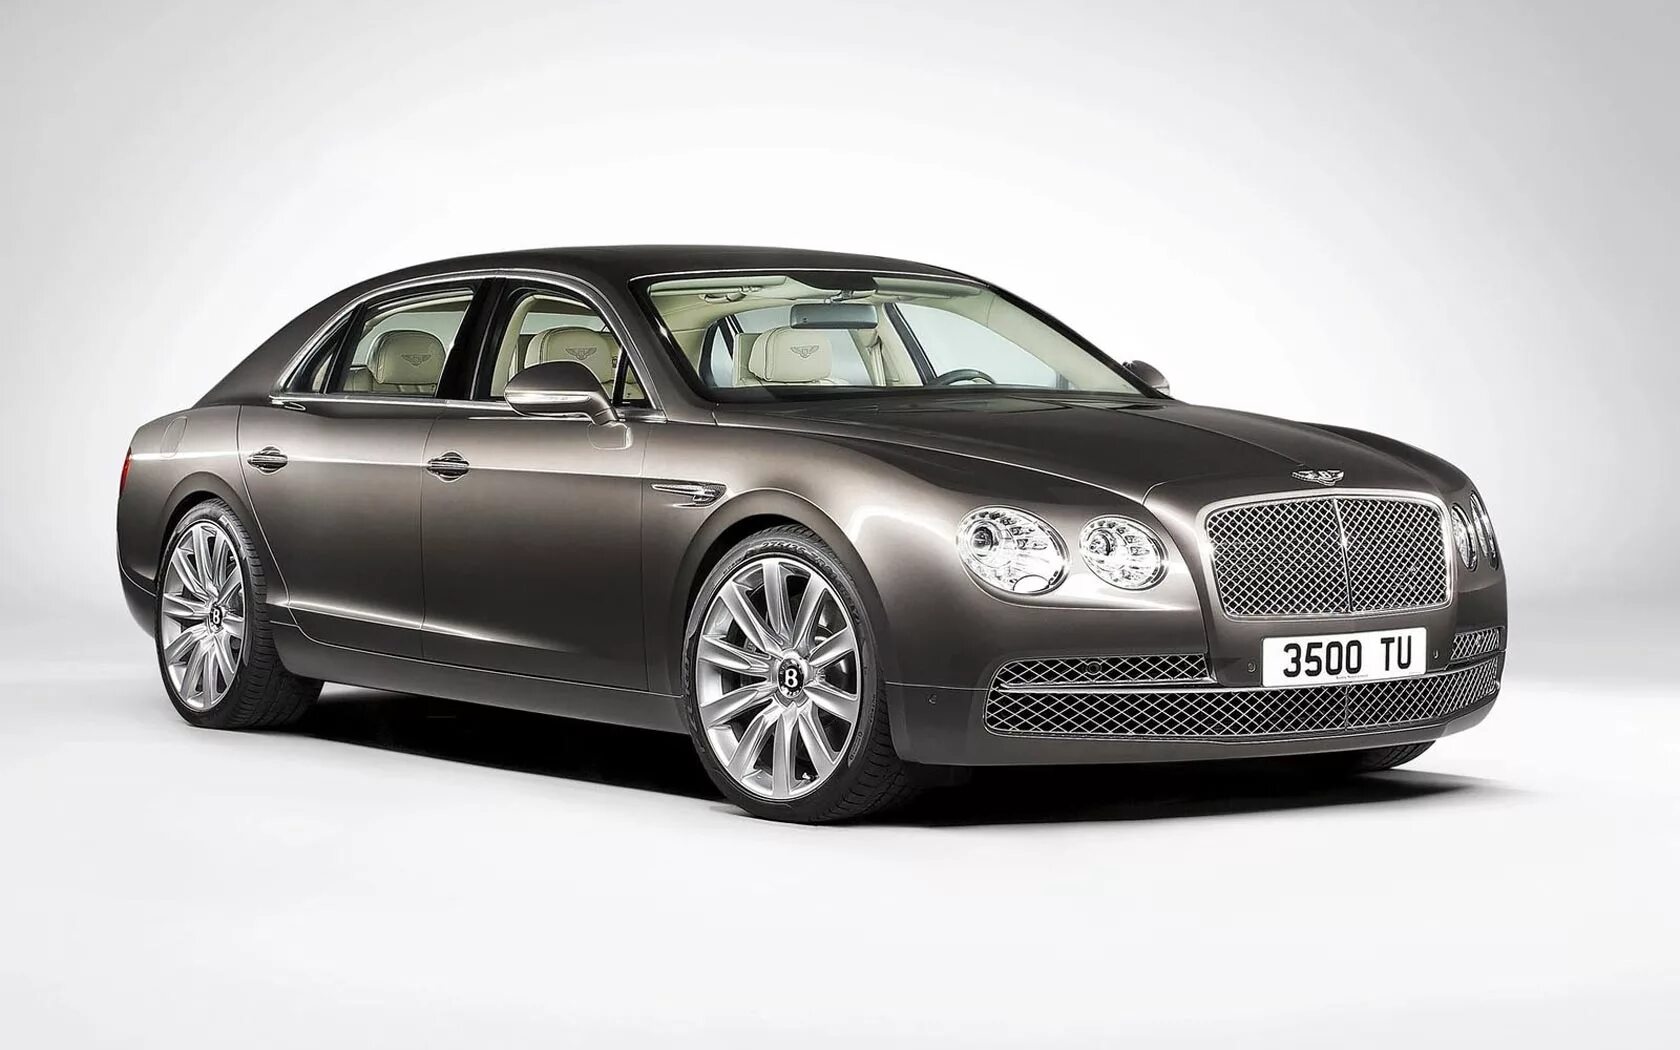 2013 Bentley Continental Flying Spur. Bentley Flying Spur 2010. Бентли Flying Spur 2014.